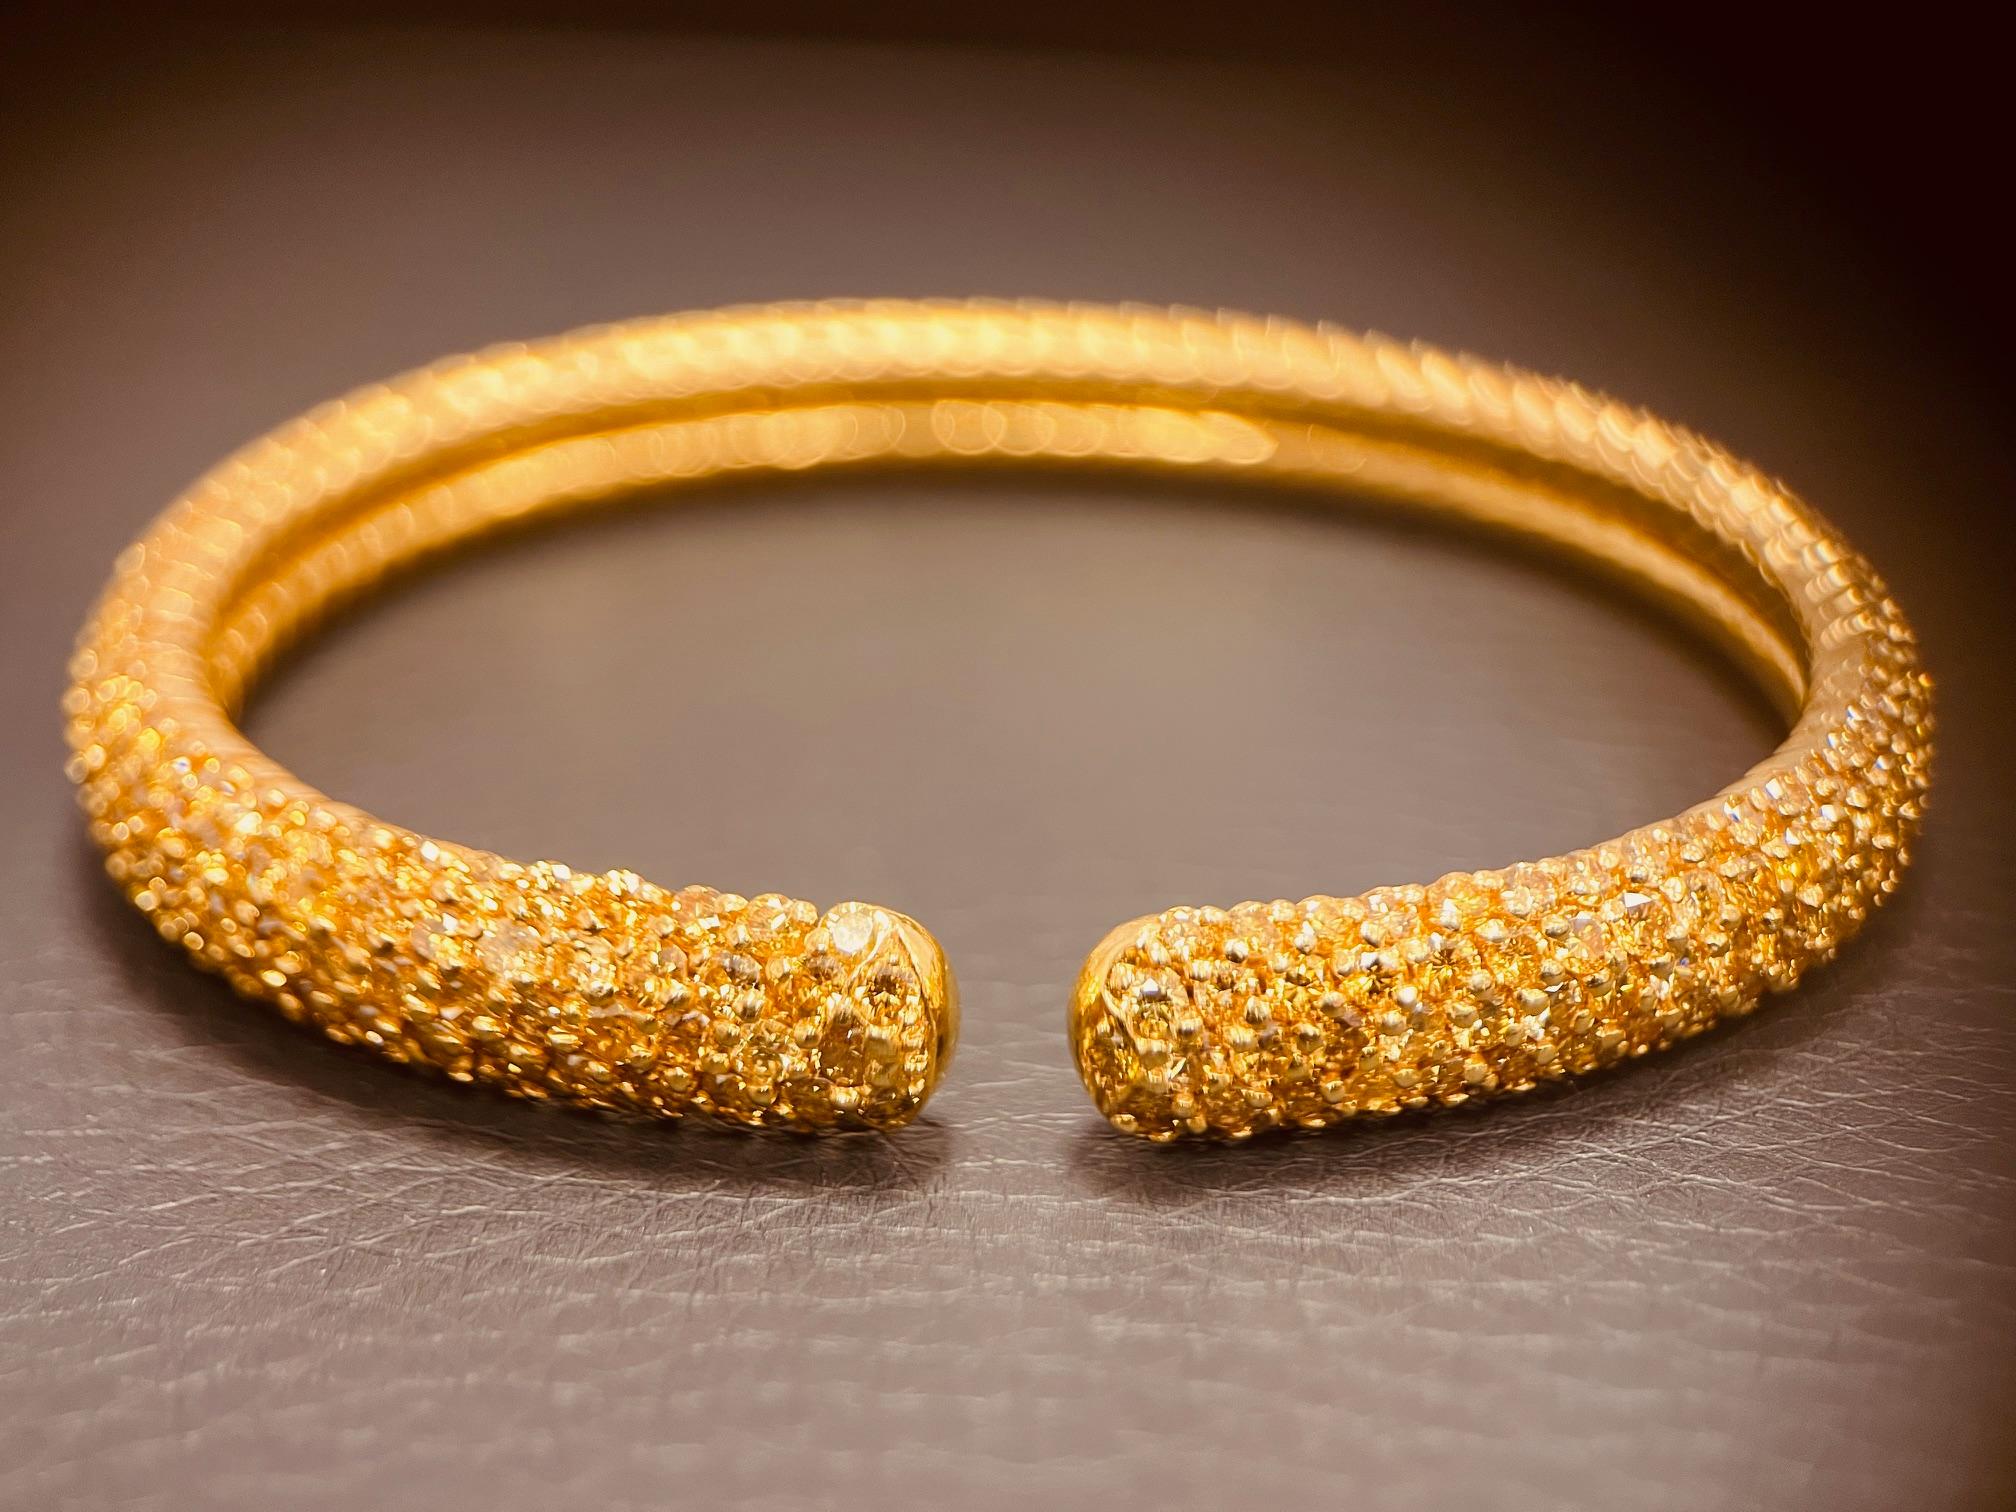 A 12 Carats Pave' Set Fancy Yellow Diamond Bangle, 9mm Width For Sale 2